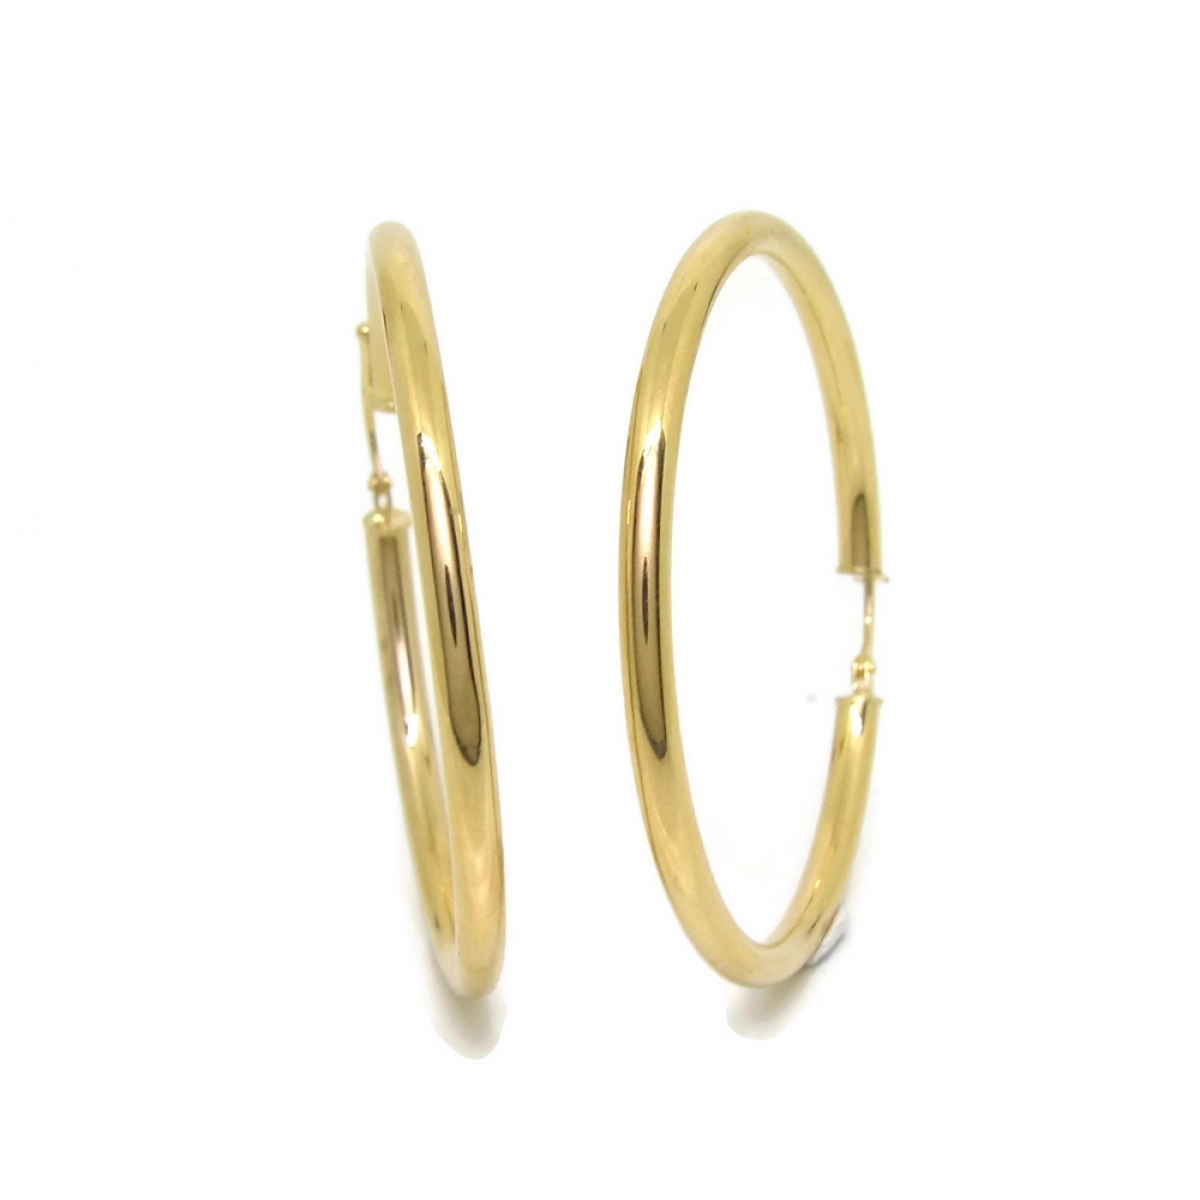 EARRINGS HOOP YELLOW GOLD 18KTES OF 3MM WIDE BY 4.5 CM DIAMETER OUTER NEVER SAY NEVER